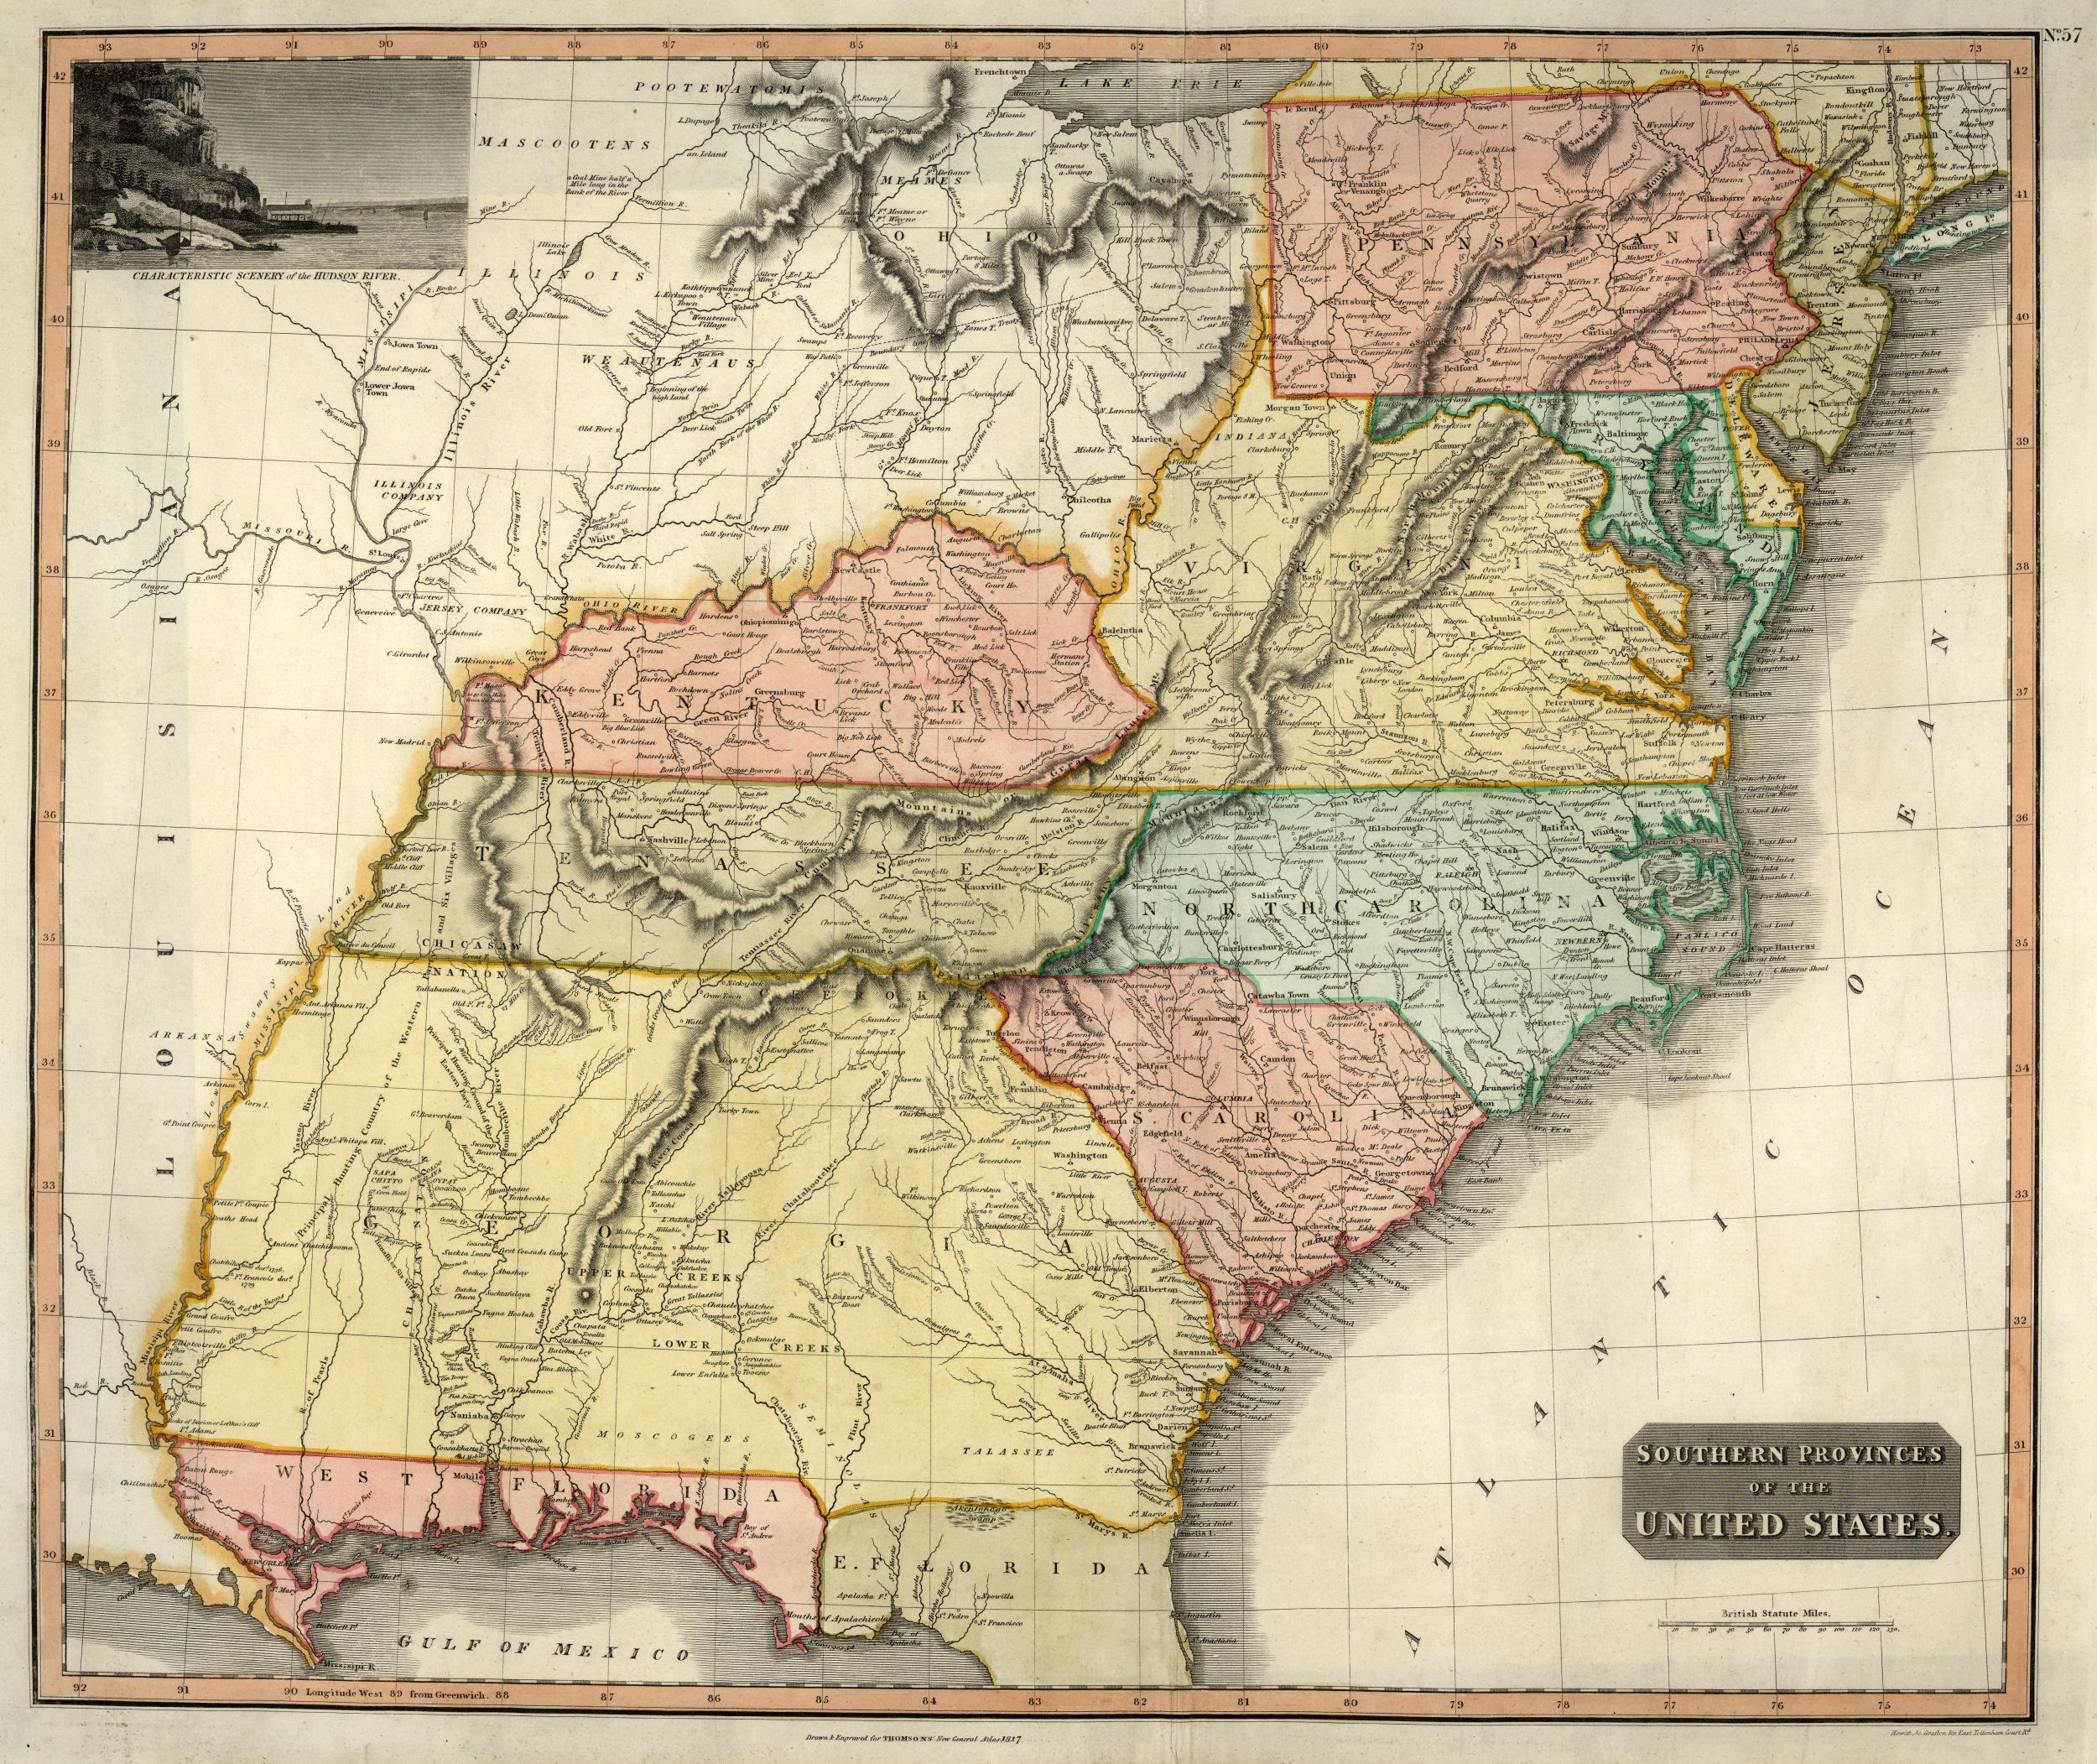 Southern Provinces of the United States, 1817